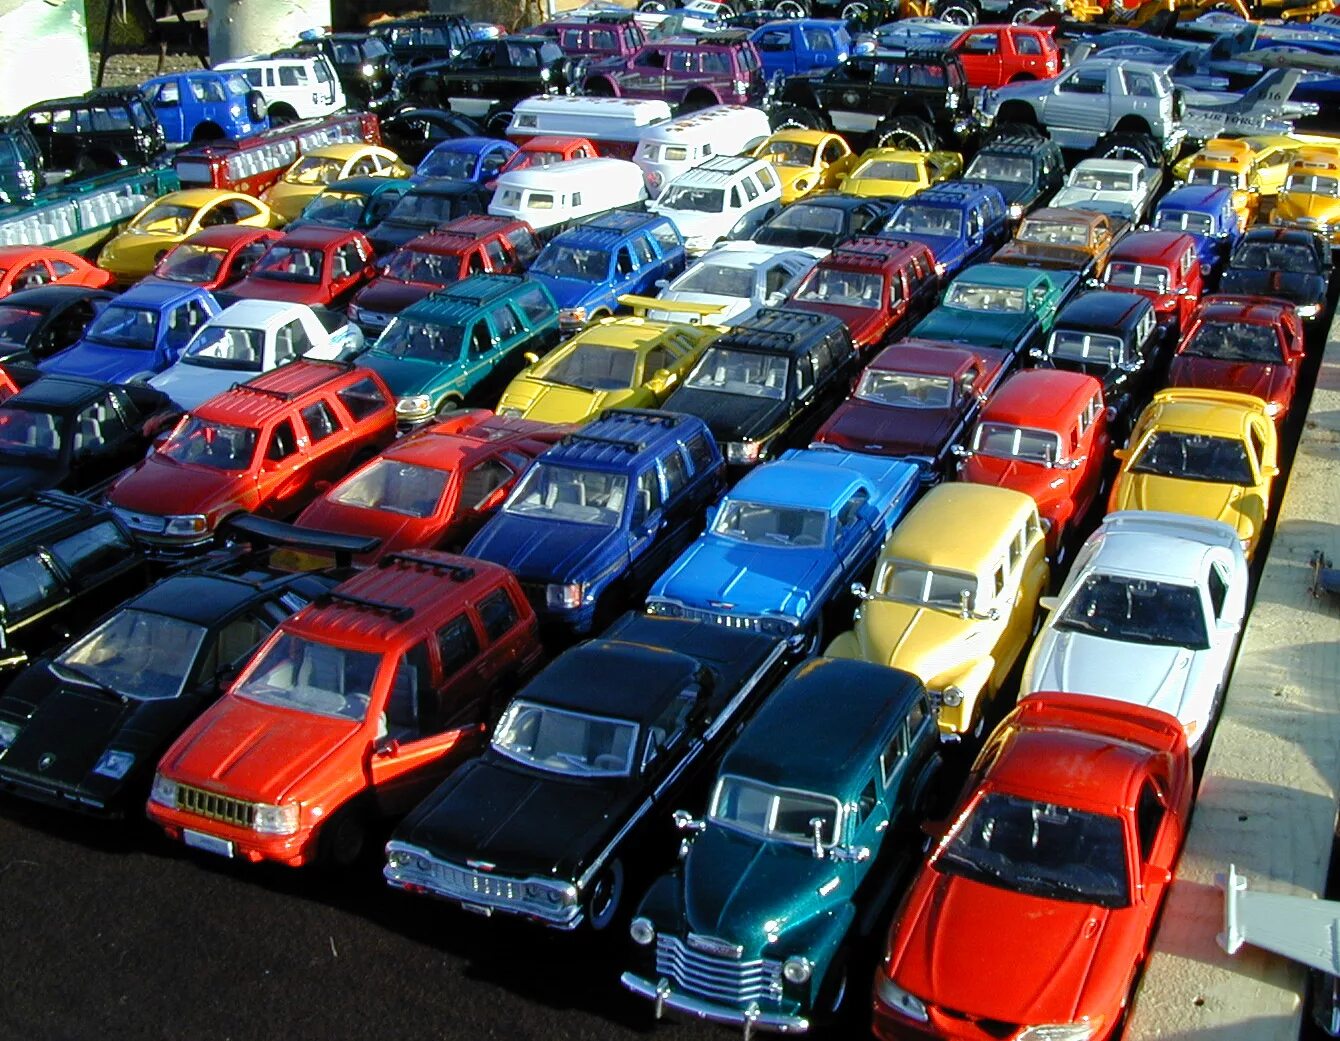 Дел машина. All cars. Car collection. Lots of cars. Cars lots of people